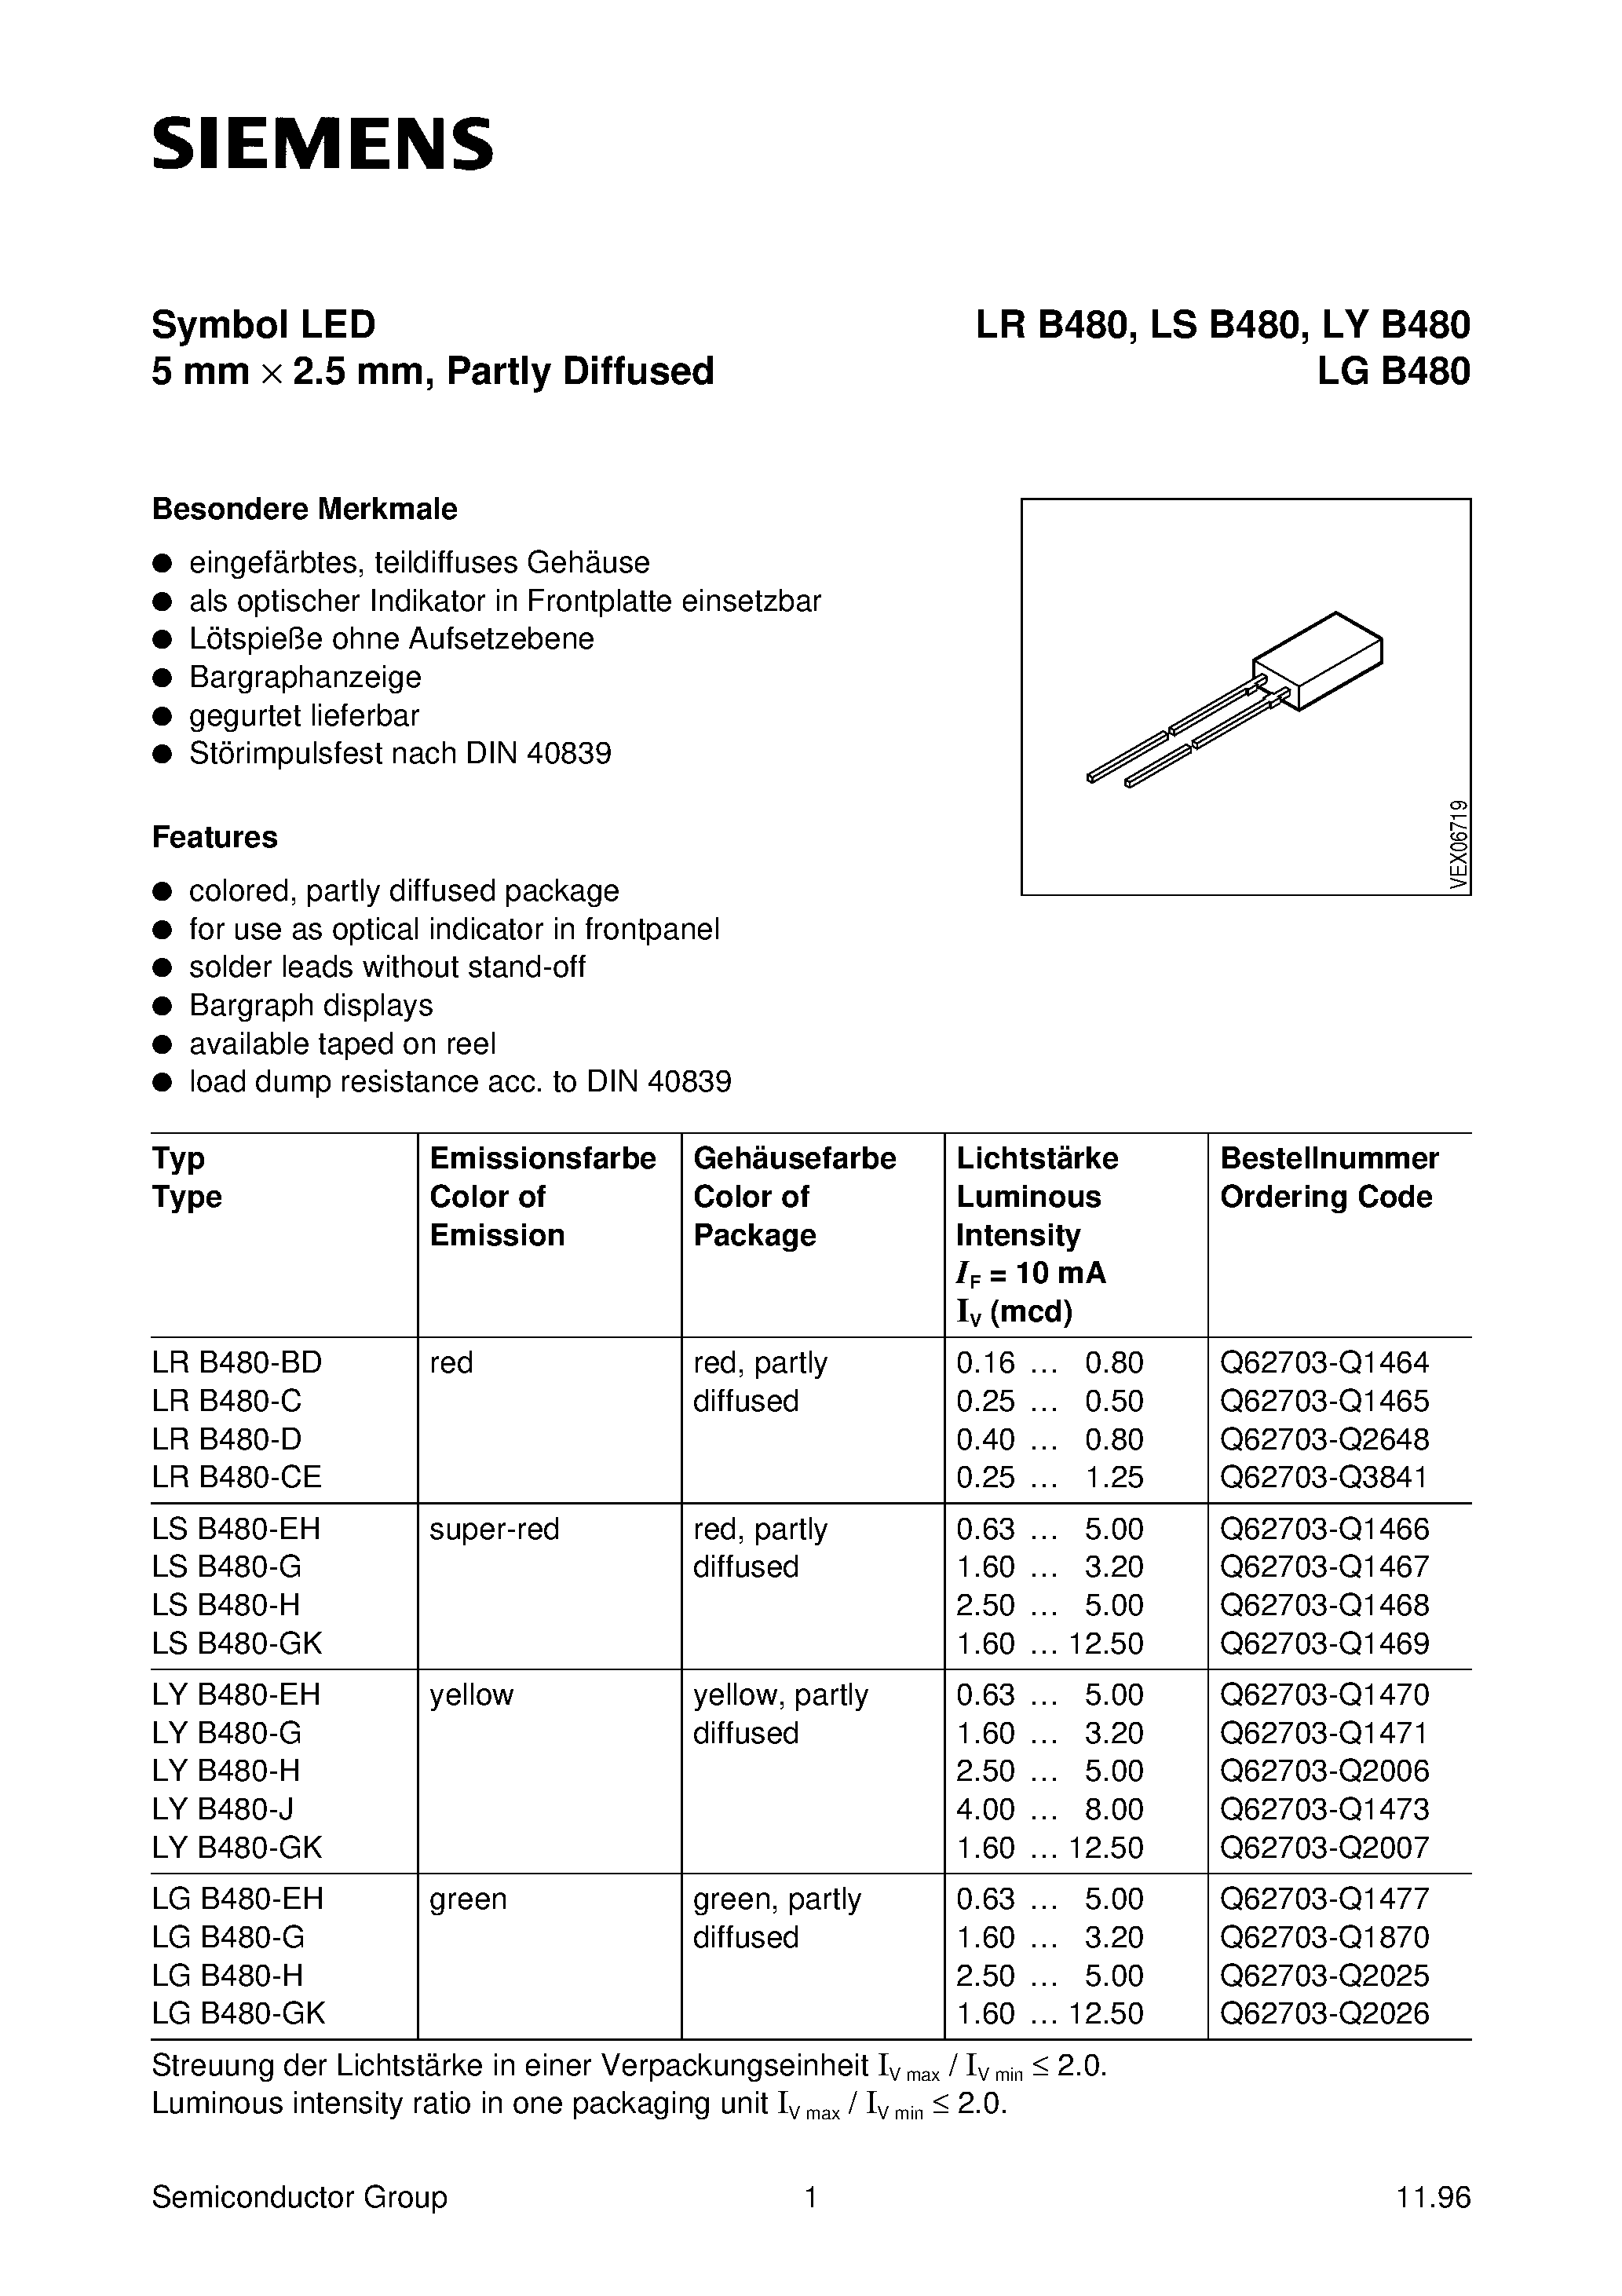 Datasheet LRB480 - Symbol LED 5 mm x 2.5 mm / Partly Diffused page 1